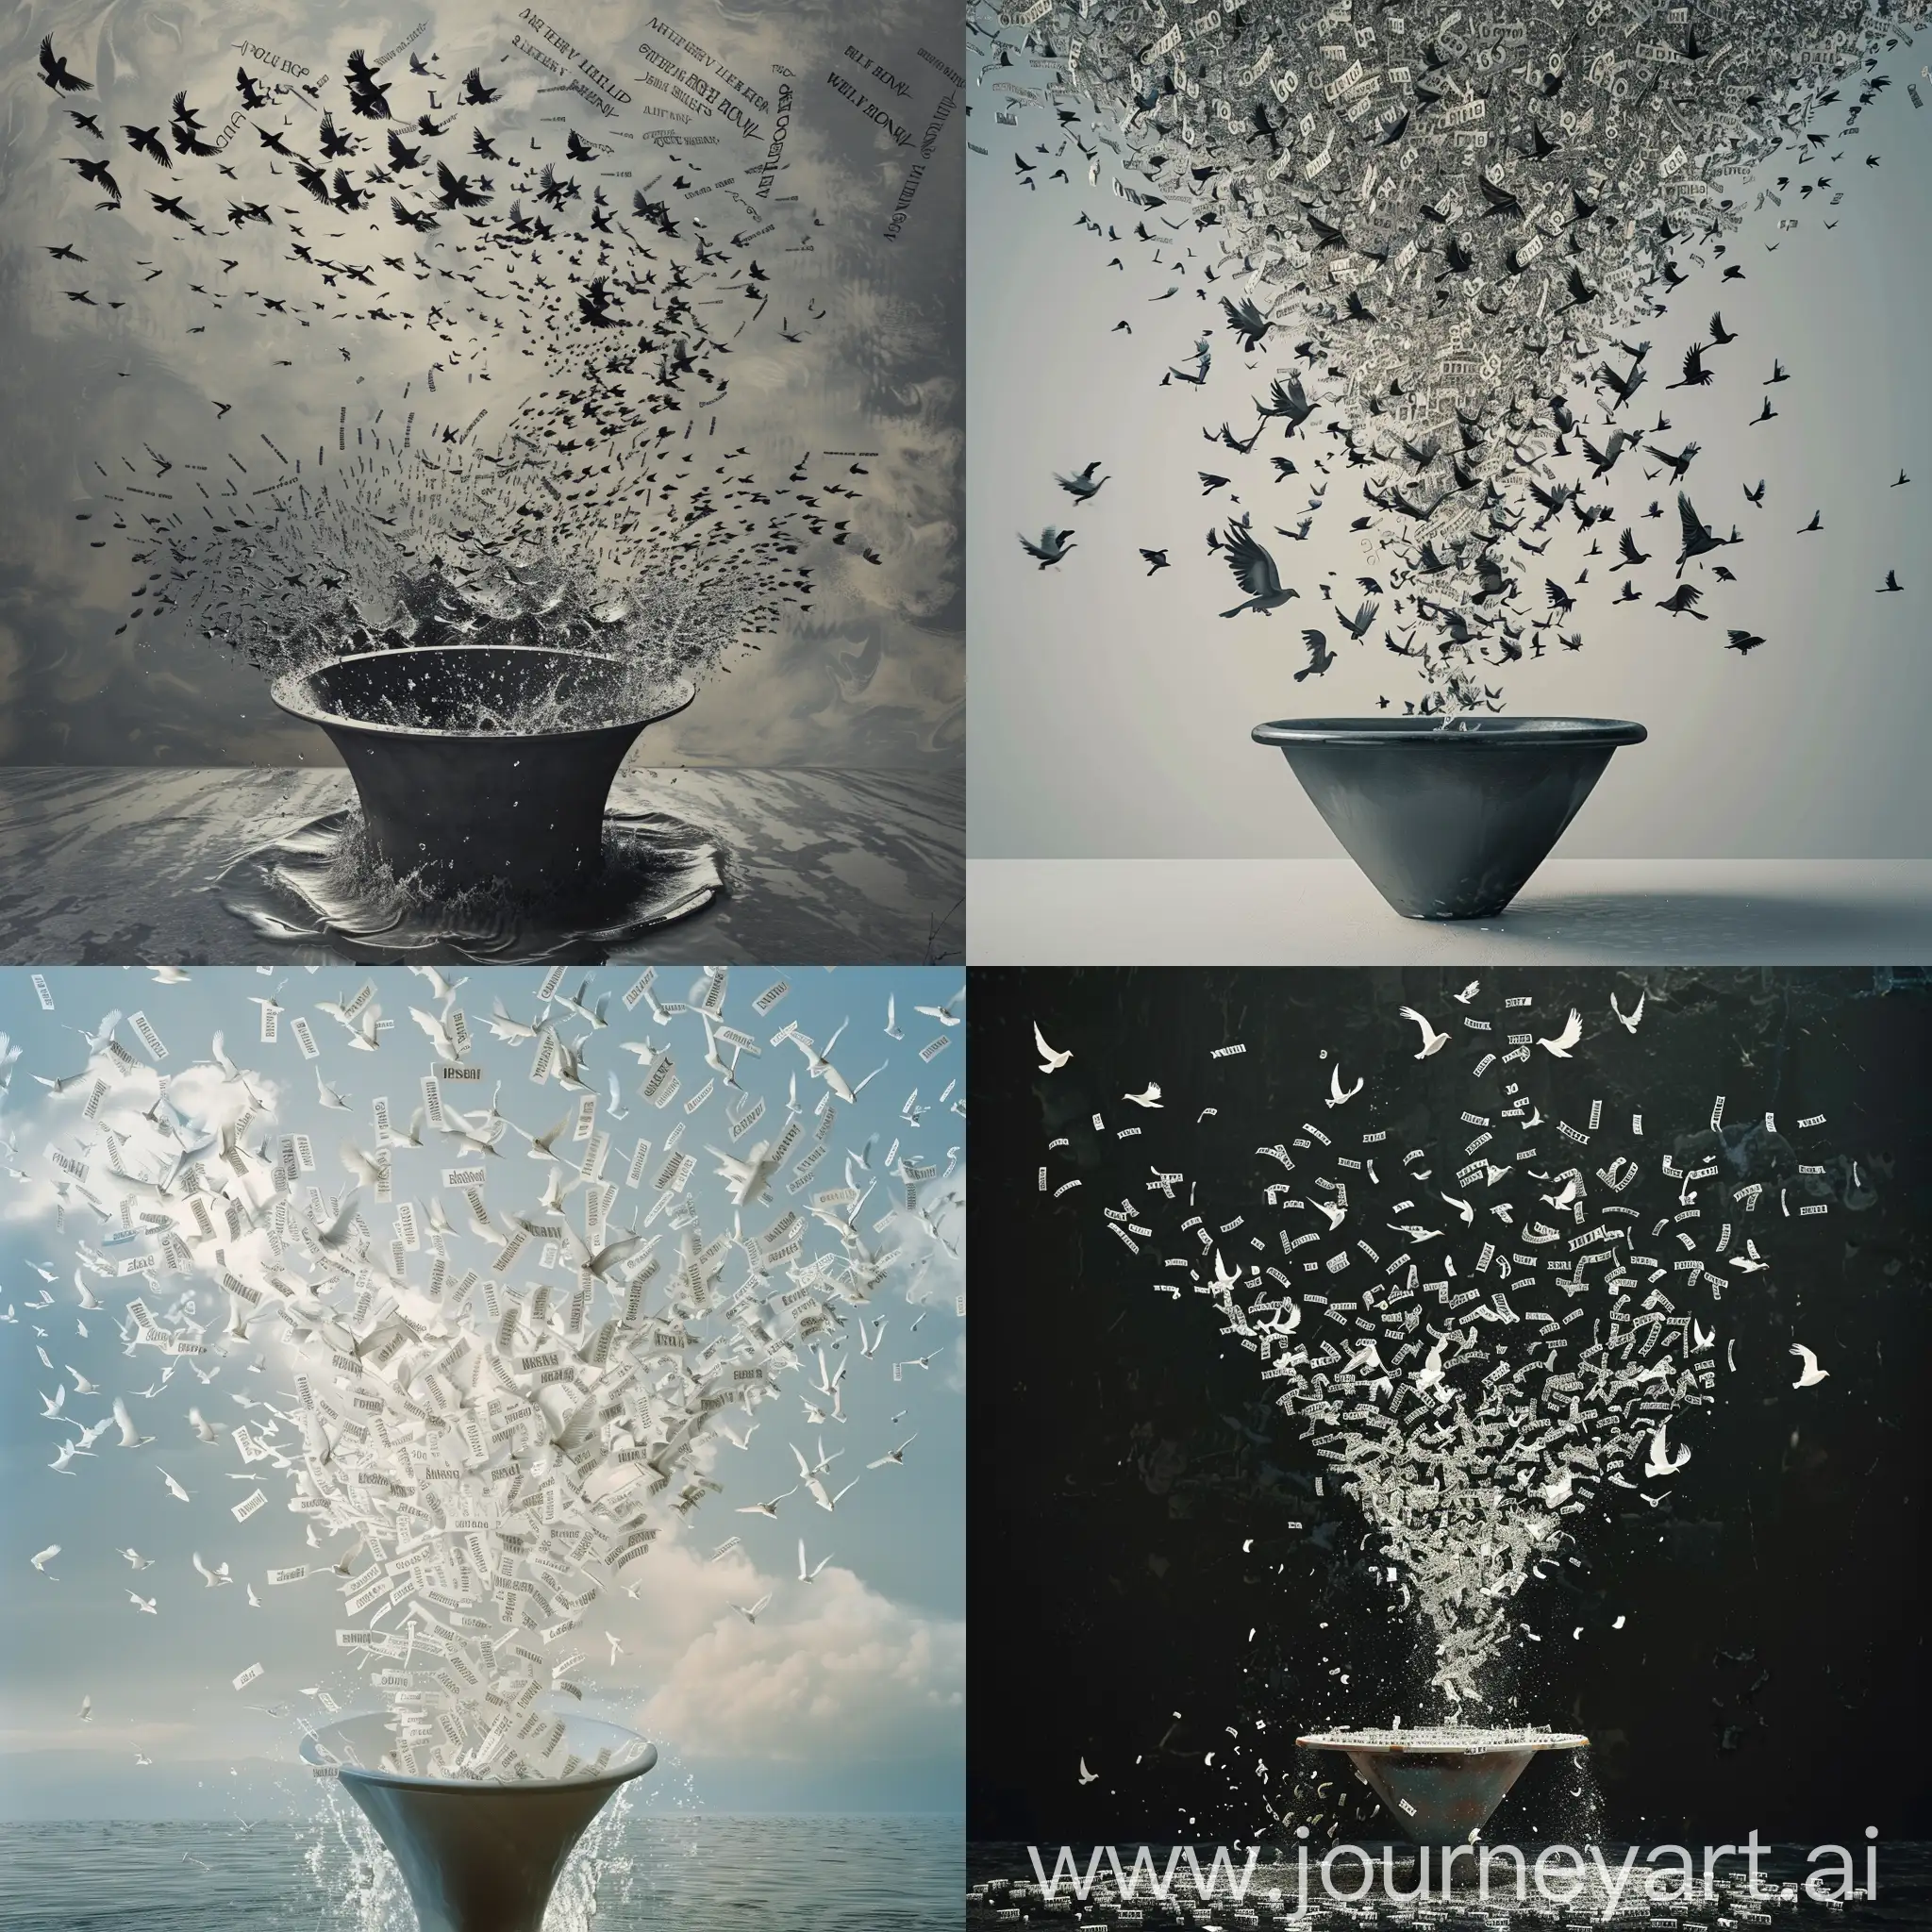 Conceptual-Art-Words-Swirling-into-Funnel